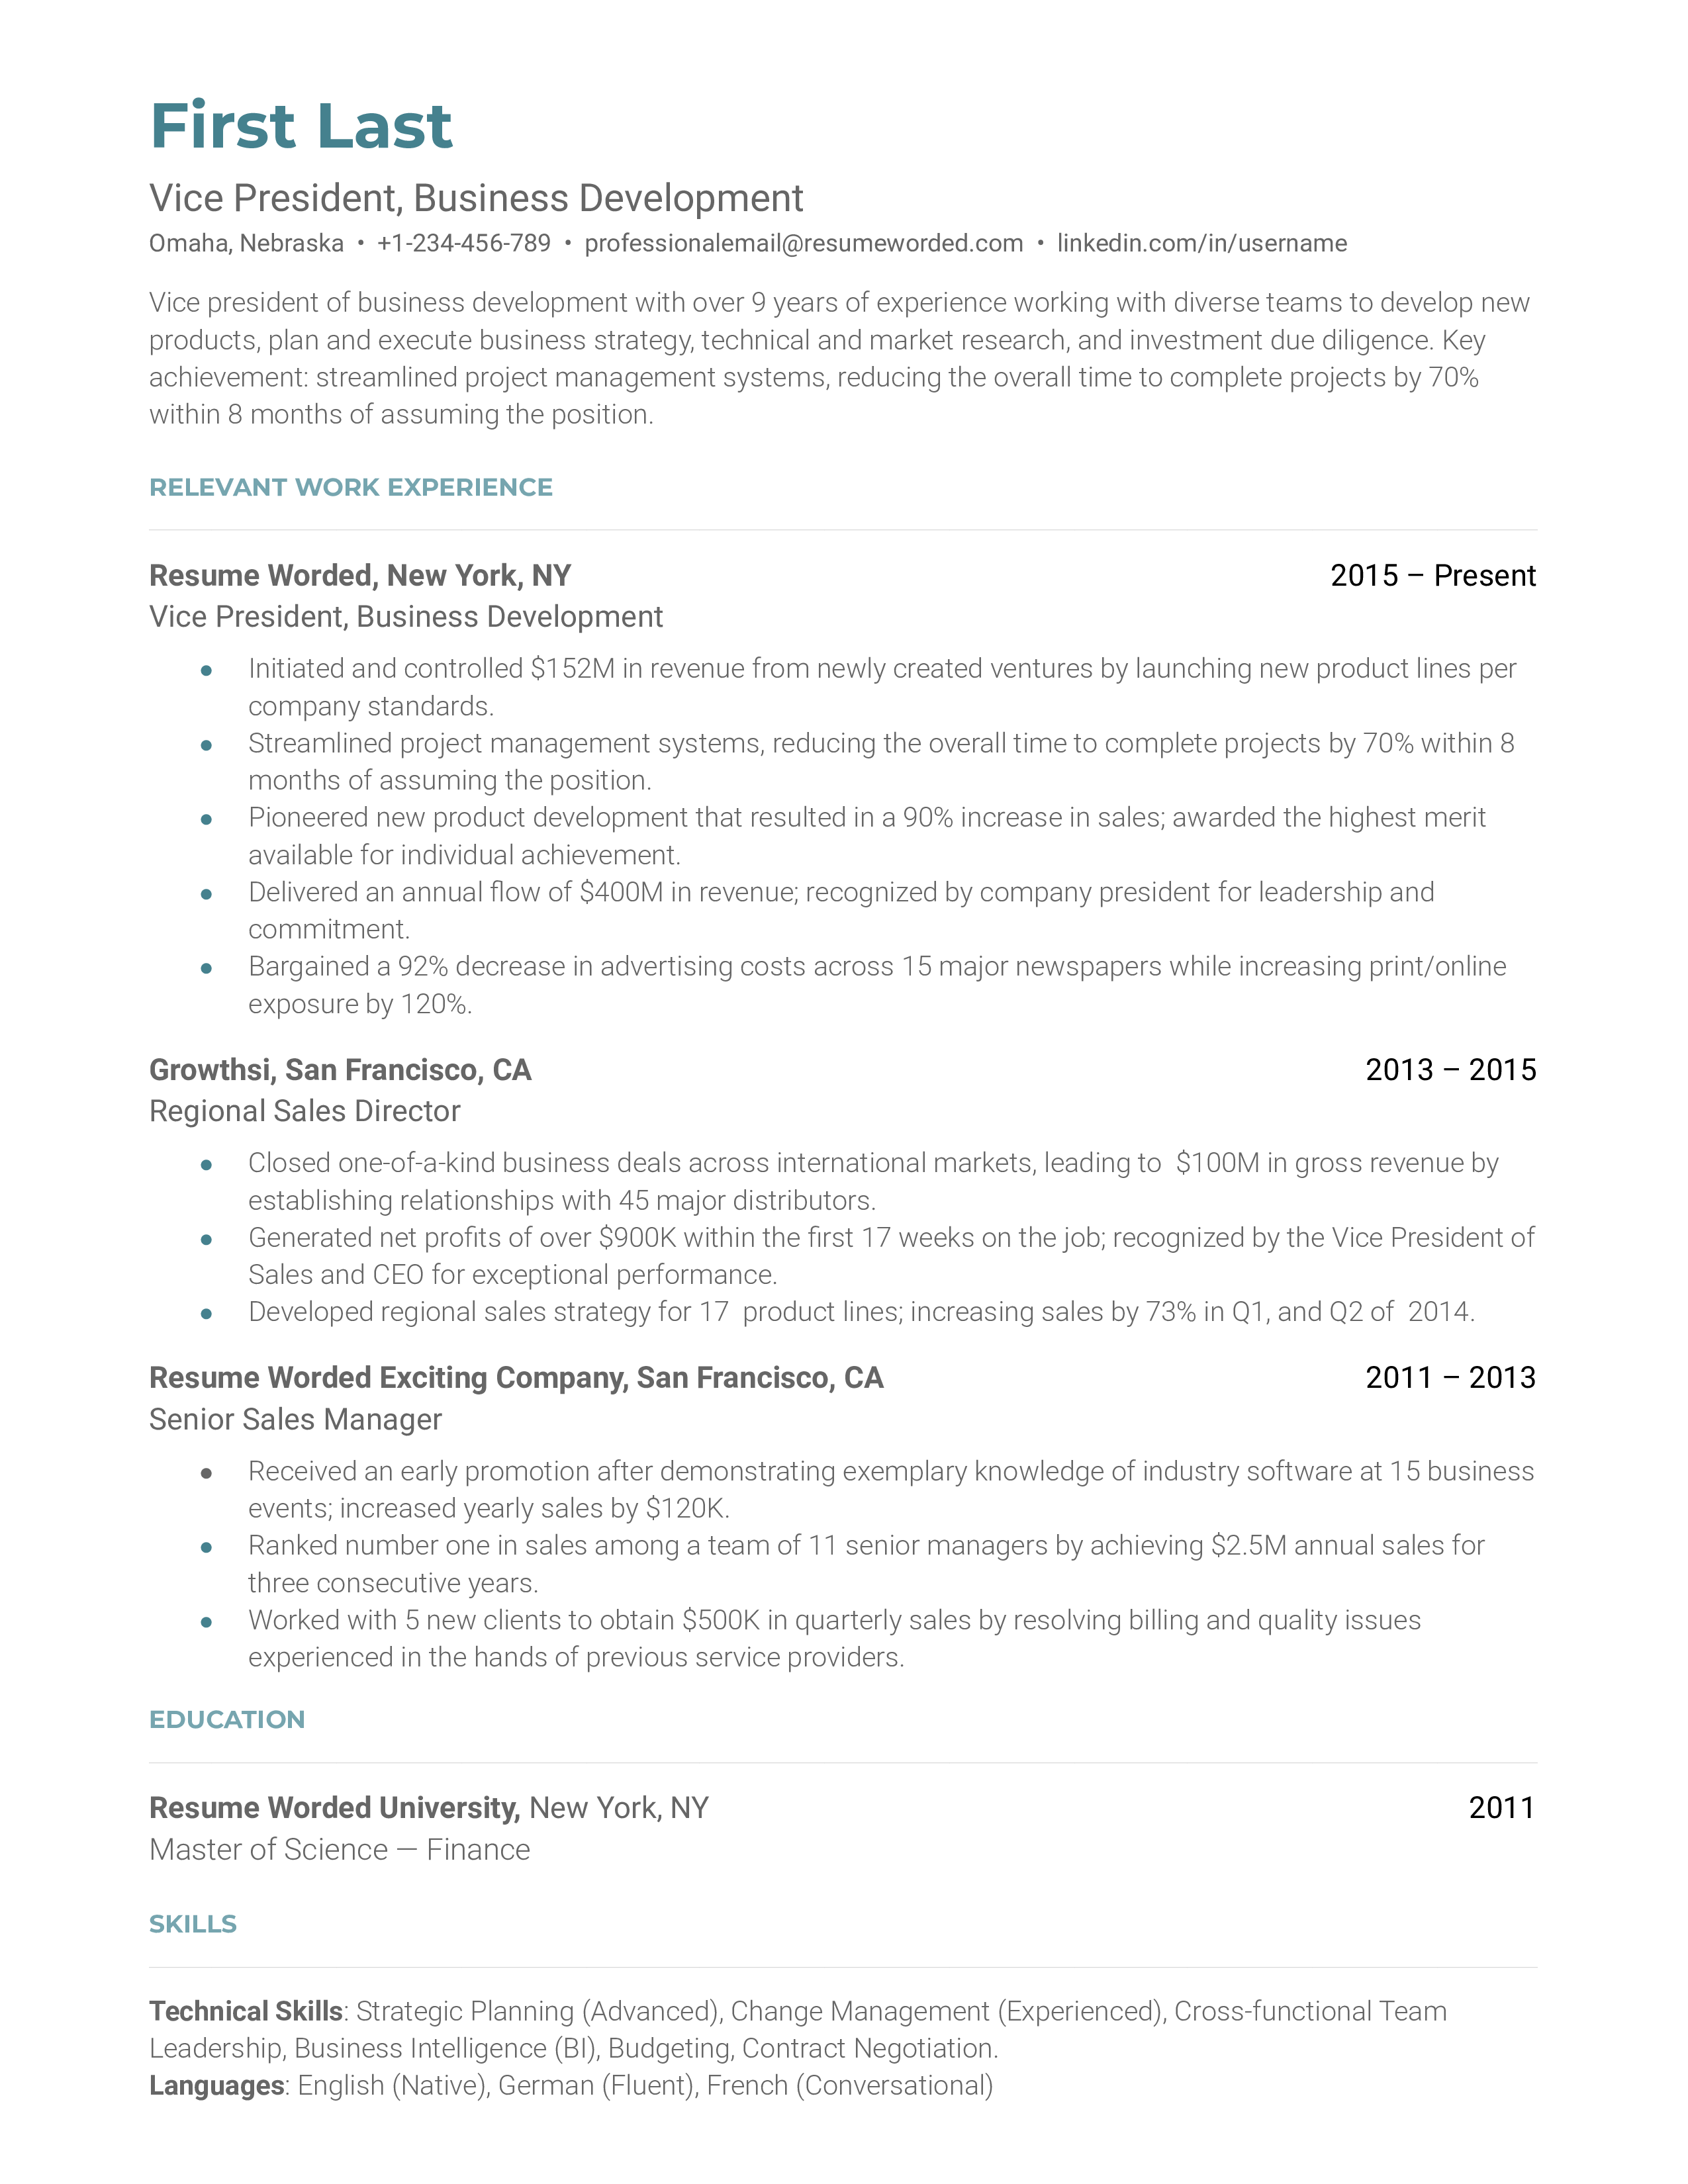 A vice president of business development resume sample that highlights the applicant’s career progression and leadership skills.